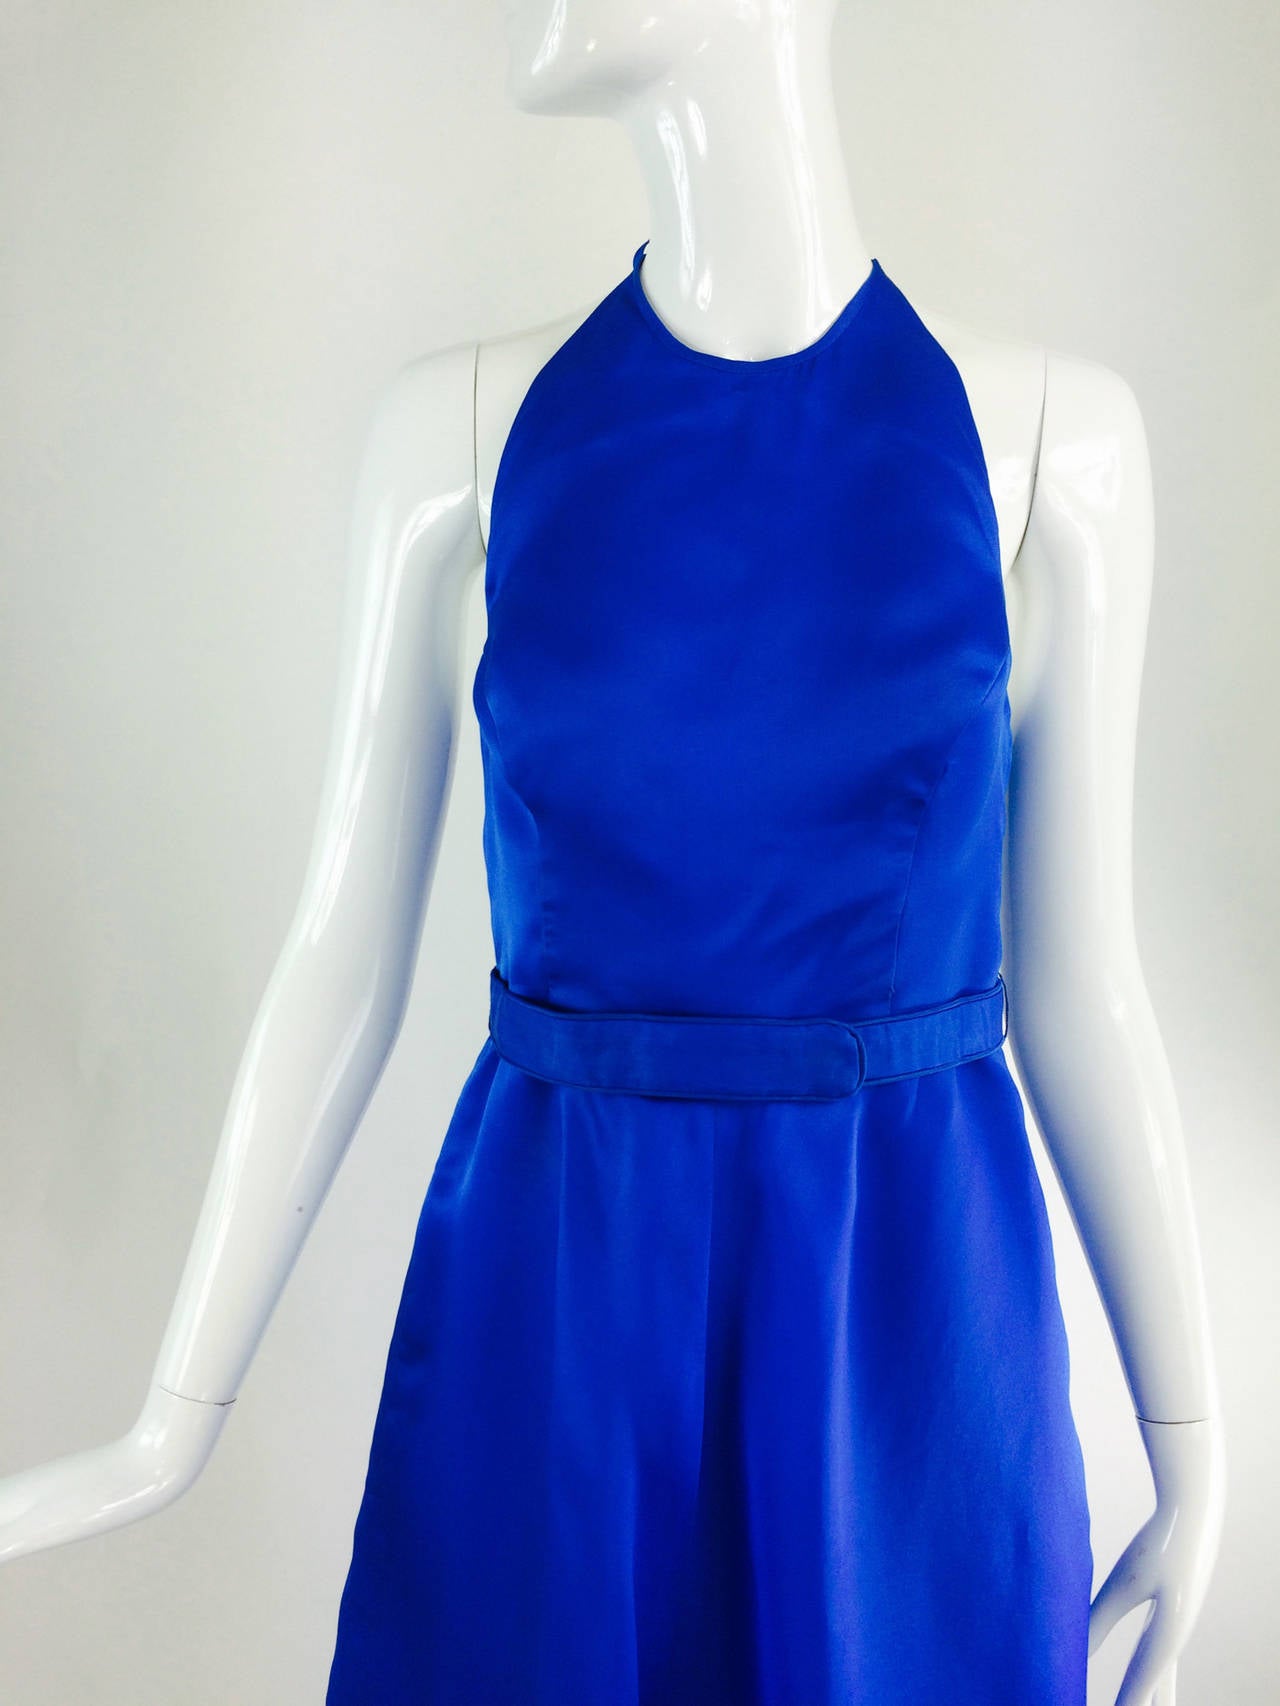 Fiandaca cerulean blue silk halter neck shaped hem gown 1990s...Fitted bodice gown has princess seaming at the front, the back dips low, the halter neck ties at the neck back with delicate silk ties...The skirt of the dress is bias cut and dips low